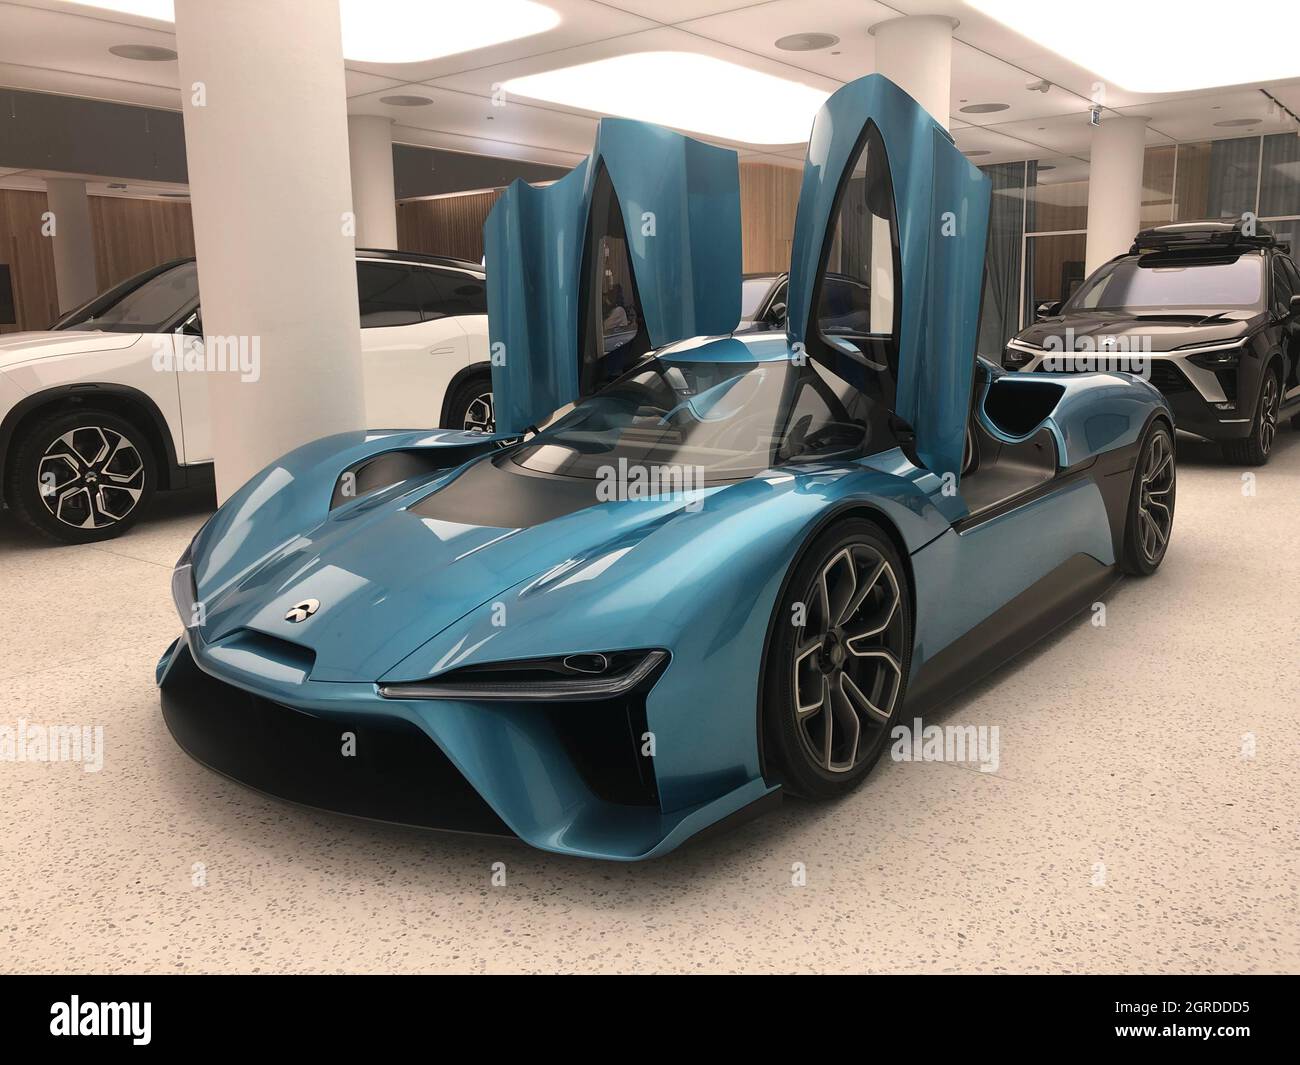 Oslo, Norway. 30th Sep, 2021. NIO cars are displayed in the NIO House in Oslo, capital of Norway, Sept. 30, 2021. Chinese electric vehicle maker NIO on Thursday opened its first NIO House in Europe here in Norway's capital, and started selling its ES8 electric sports utility vehicle in the northern European country.TO GO WITH 'Chinese EV maker NIO opens first NIO House in Norway' Credit: Zhu Sheng/Xinhua/Alamy Live News Stock Photo